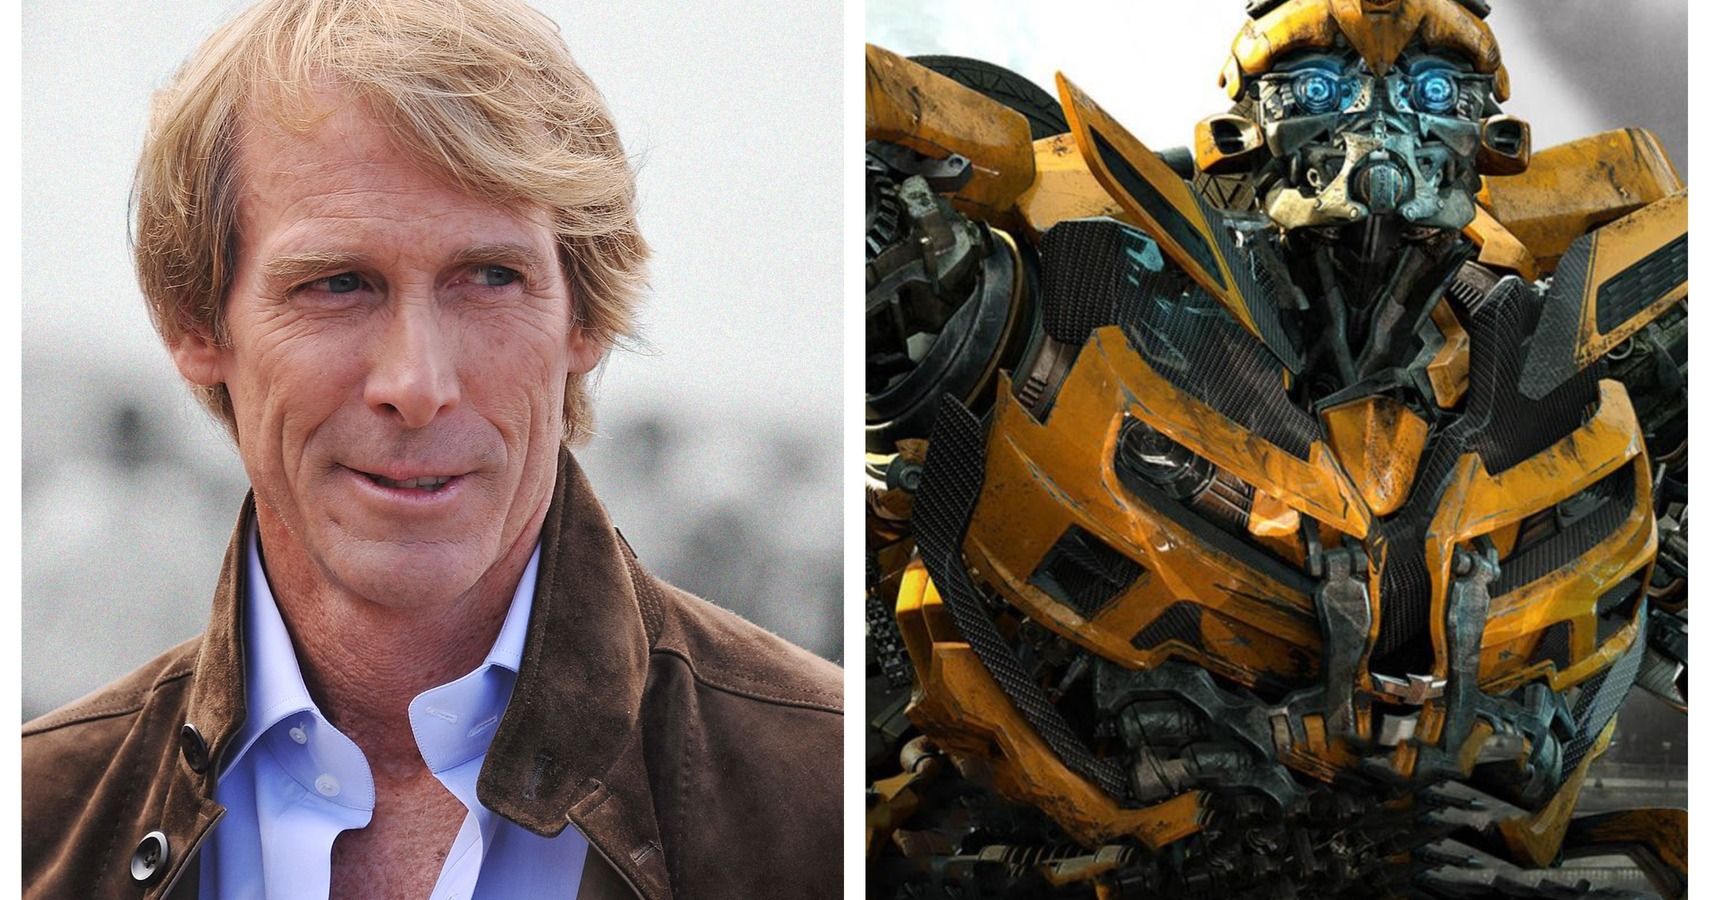 Michael Bay's 10 Best Movies (According To Rotten Tomatoes)